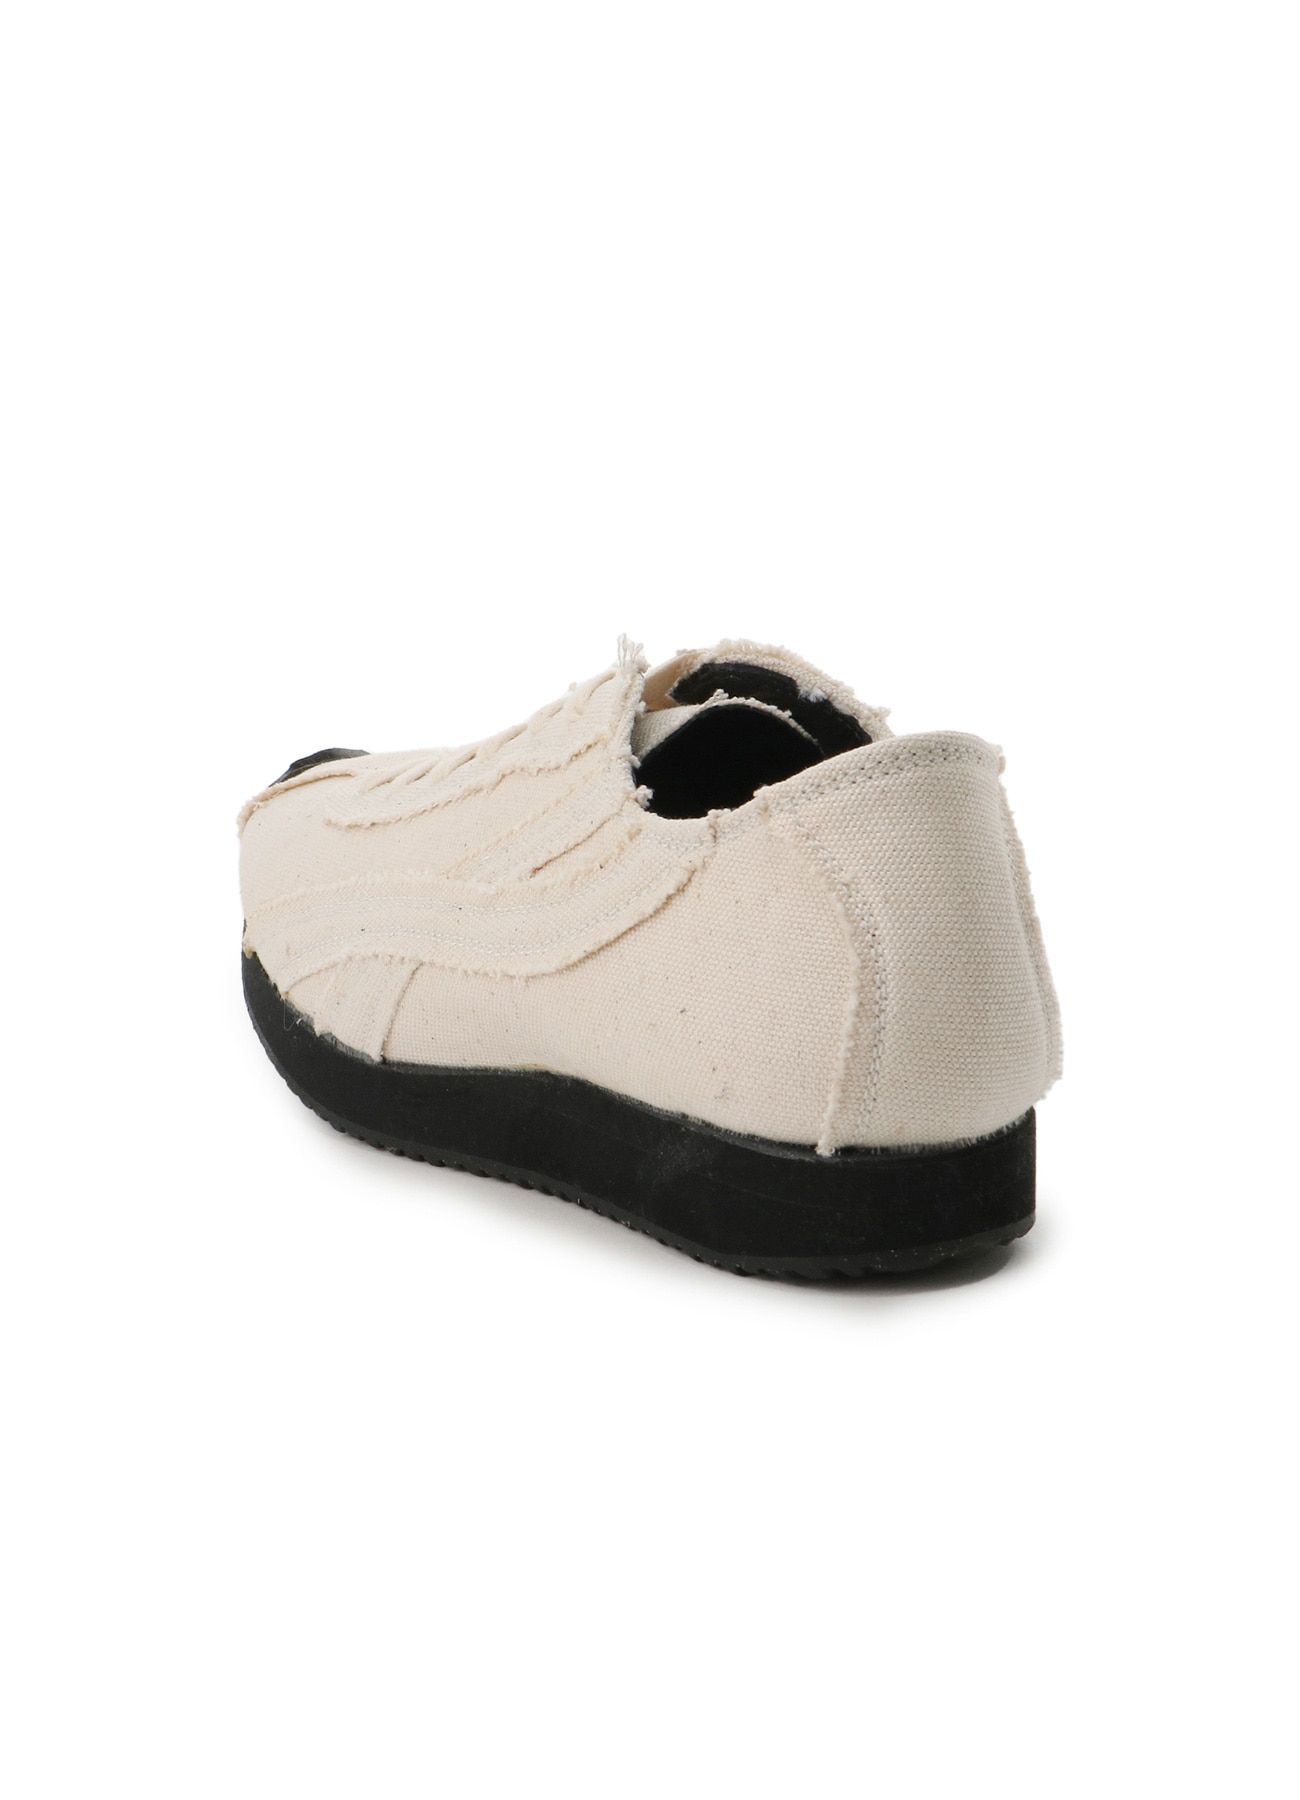 NO.8 CANVAS CUTOFF XLINE RUNNING SHOES(27cm Ivory): Vintage｜THE 